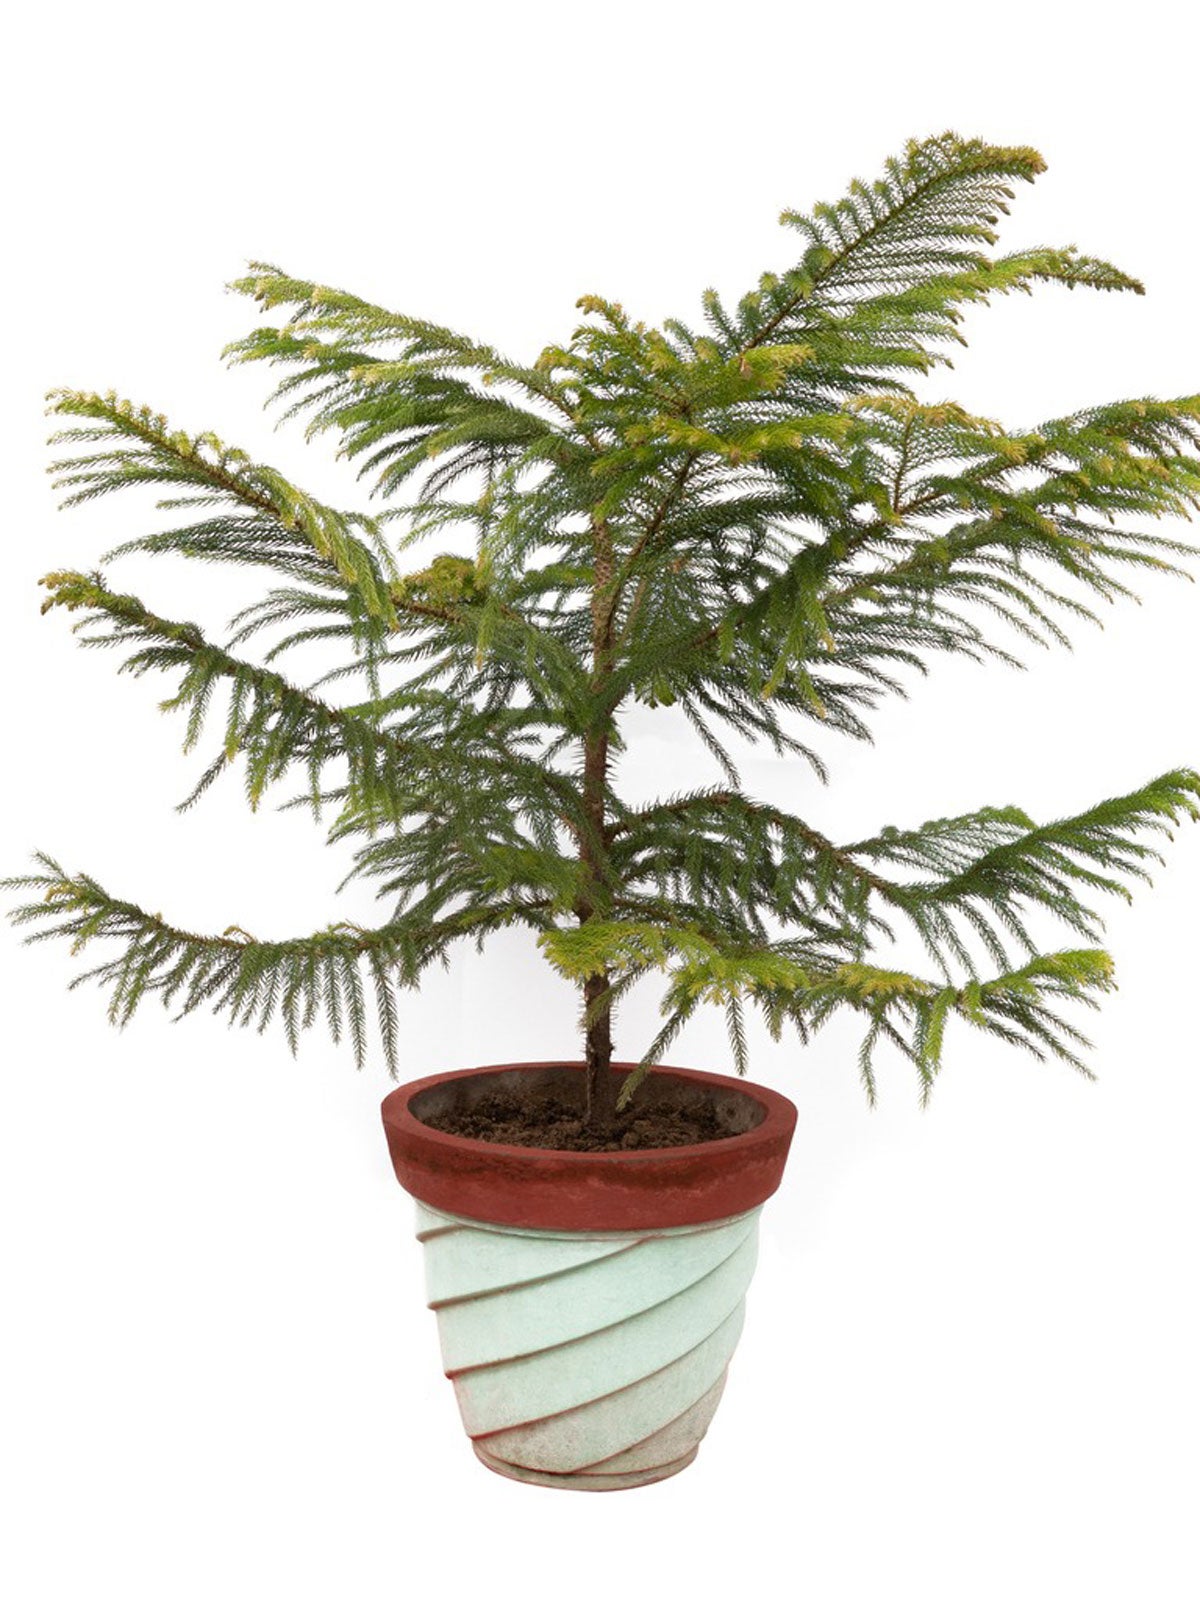 Conifers As Houseplants – Tips On Growing Indoor Conifer Plants